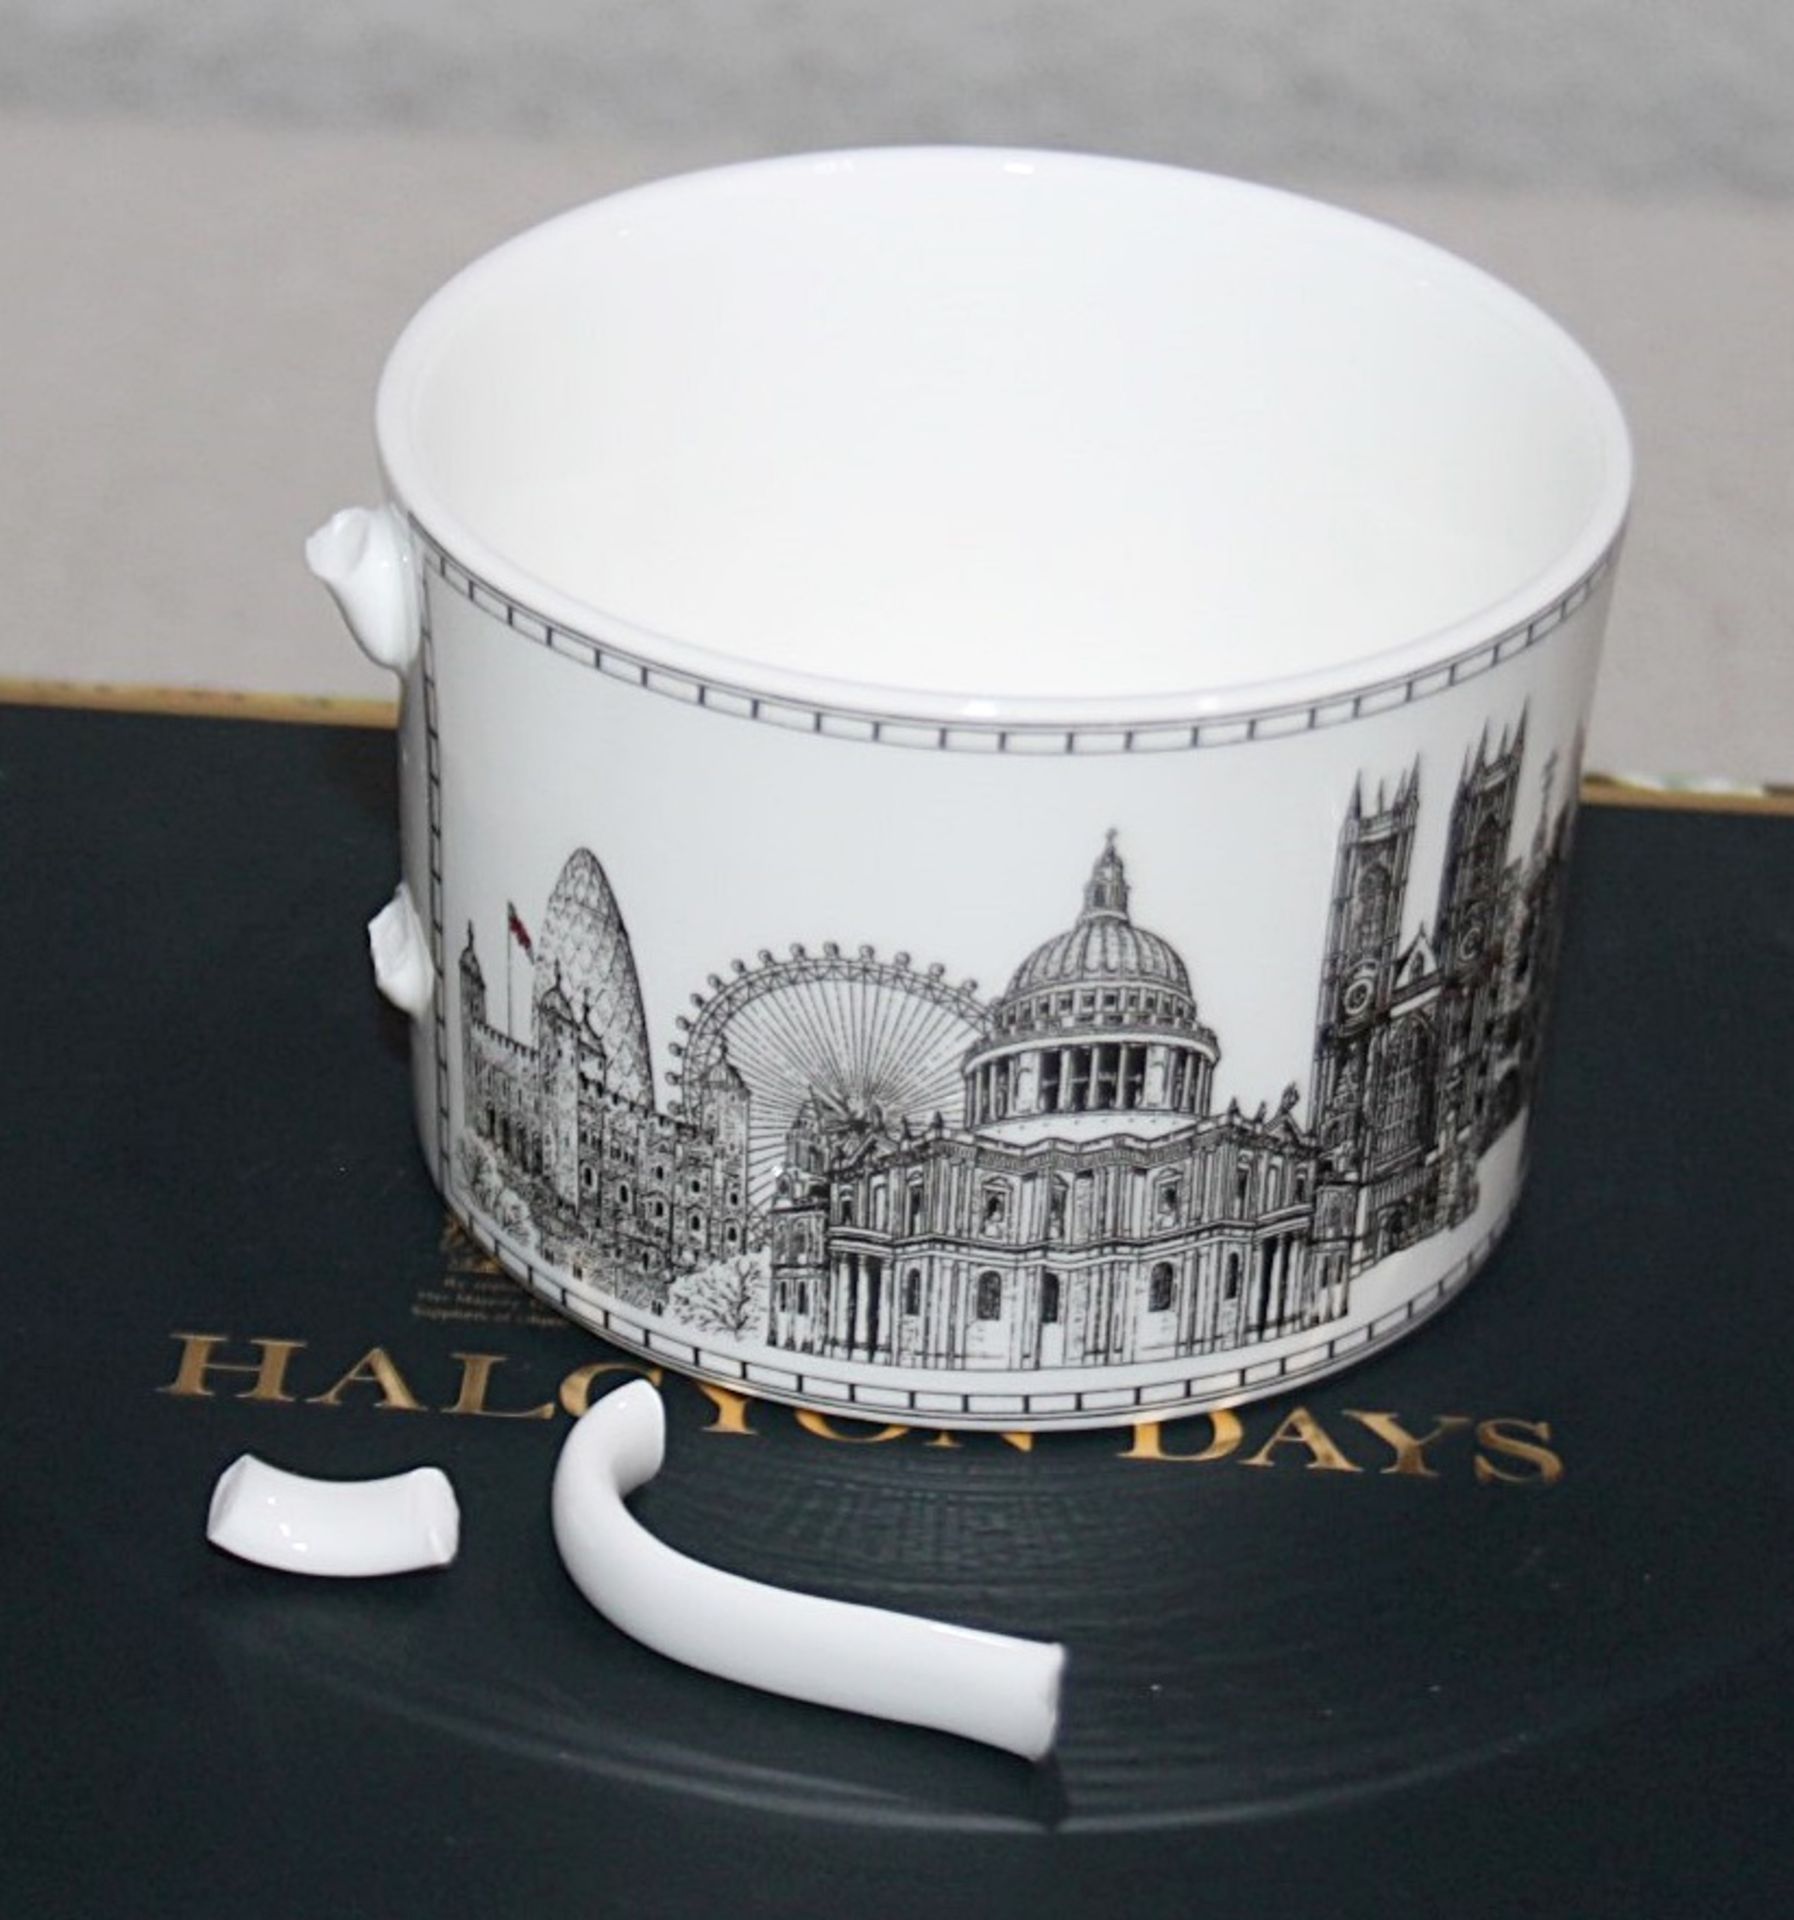 1 x HALCYON DAYS 'London Icons' Bone China Teacup & Saucer - Original Price £79.95 - Read Condition - Image 2 of 10